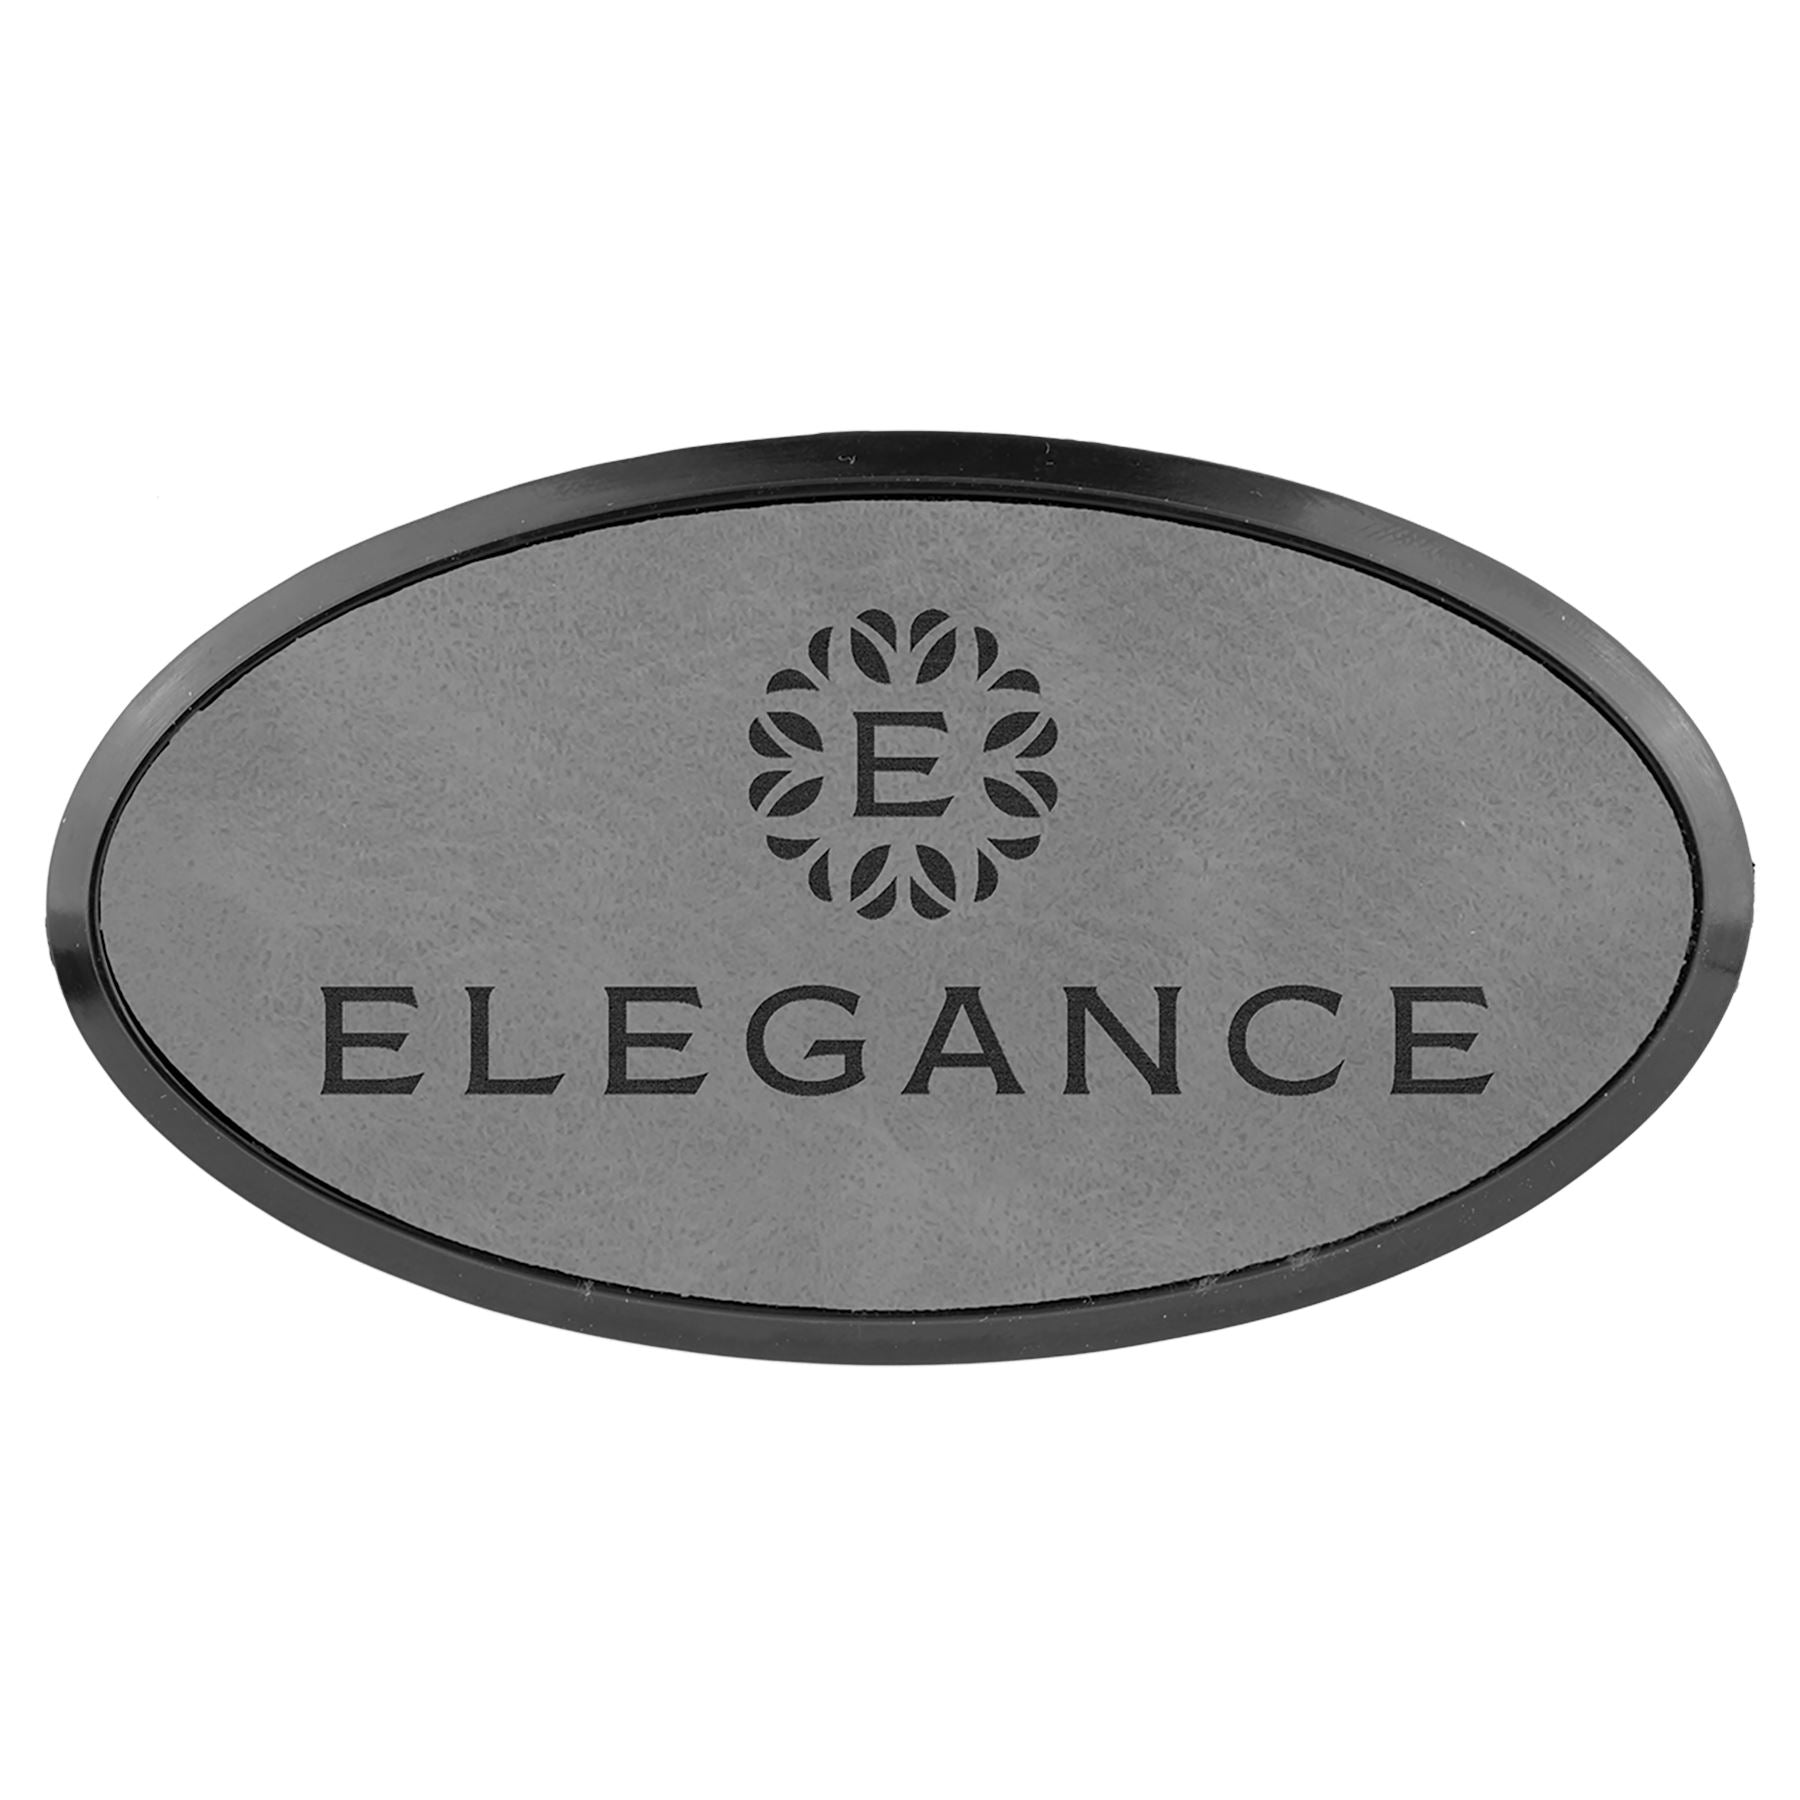 Oval Badge w/Frame, Laserable Leatherette 3 1/2" x 1 1/2" Name Badge Craftworks NW Gray/Black 